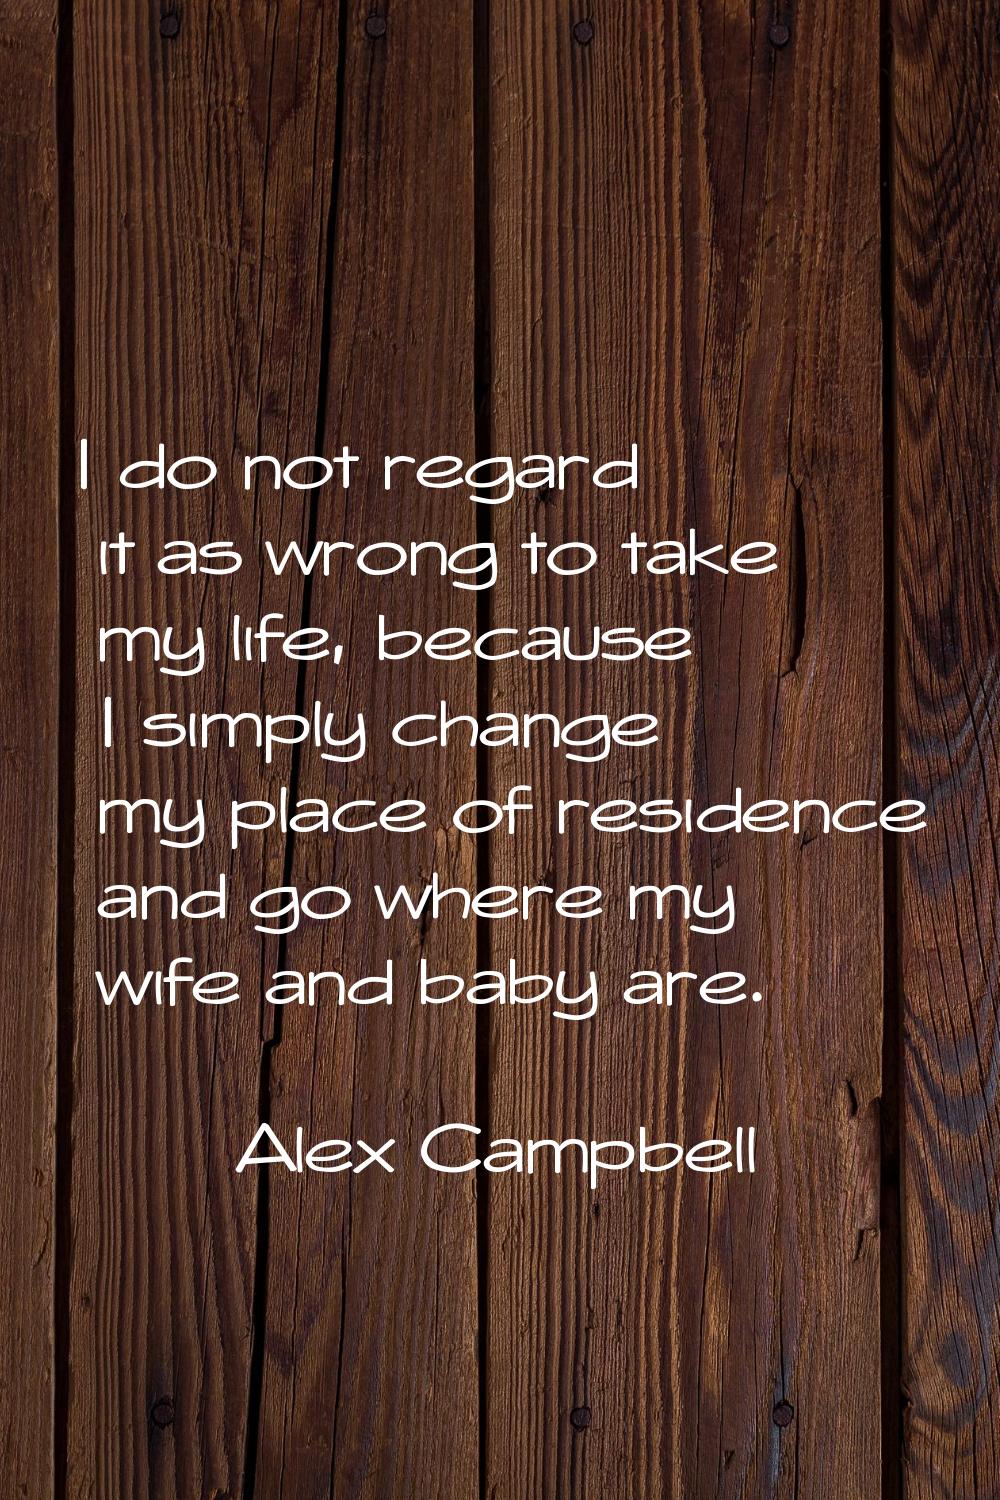 I do not regard it as wrong to take my life, because I simply change my place of residence and go w